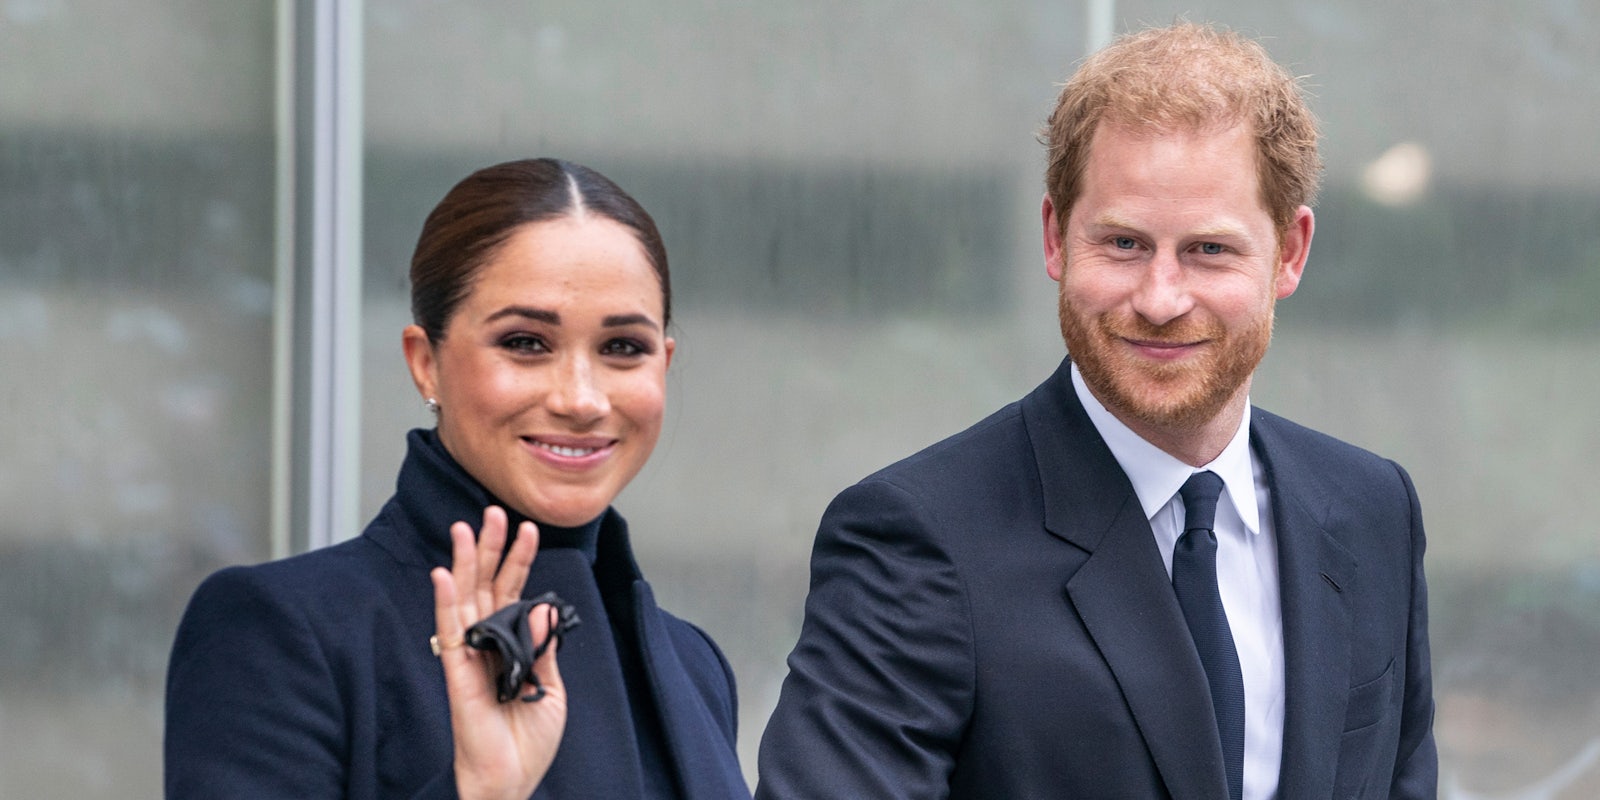 Prince Harry and Meghan in front of glass panes background